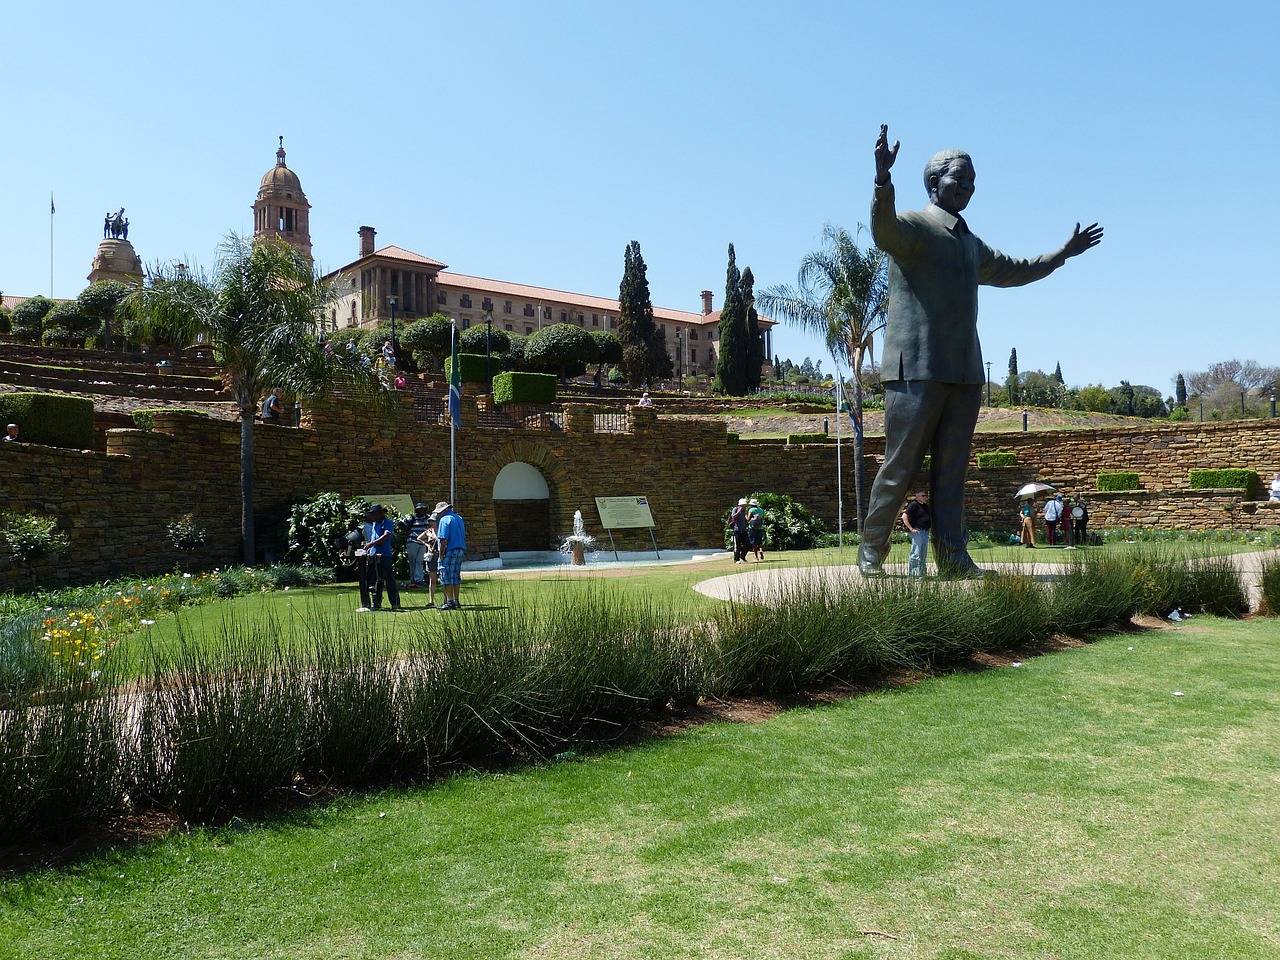 A view of the Union building gardens with the majestic statue of legendary Nelson Mandela